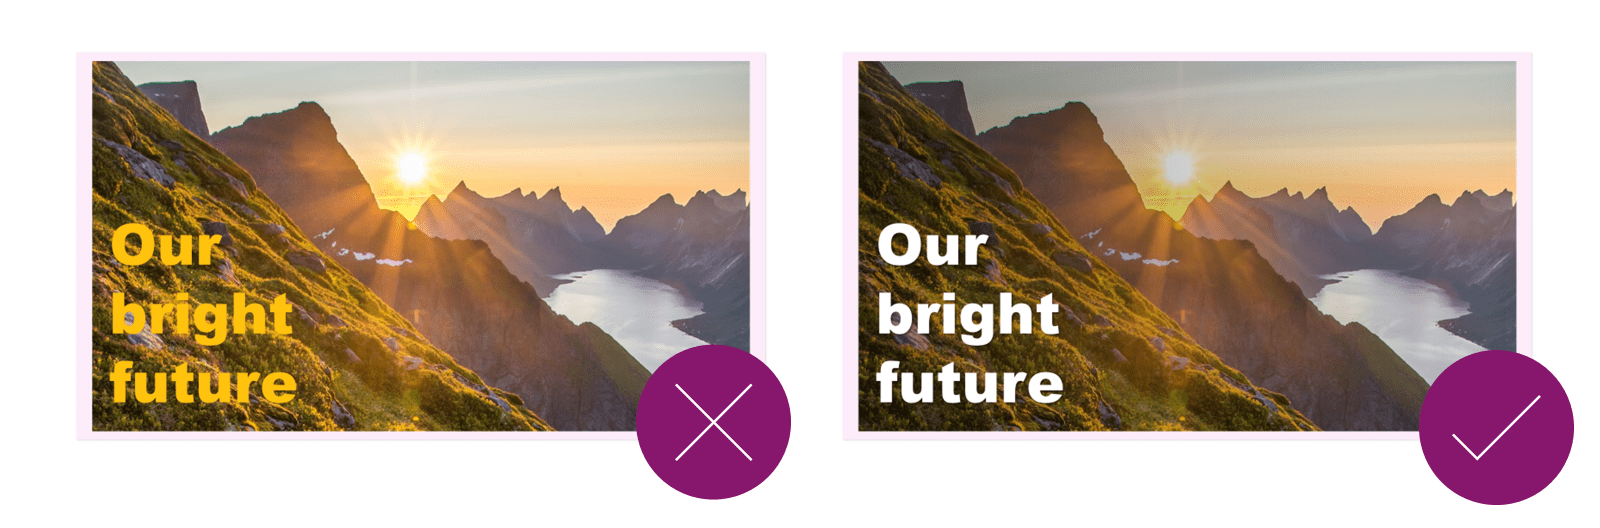 Two slides sit side by side with the same picture on. On the left the text 'our bright furture; in yellow sits on top of the image and is hard to read. On the right, the image is darker, the text is white and has a shadow underneath. It is easy to read. 